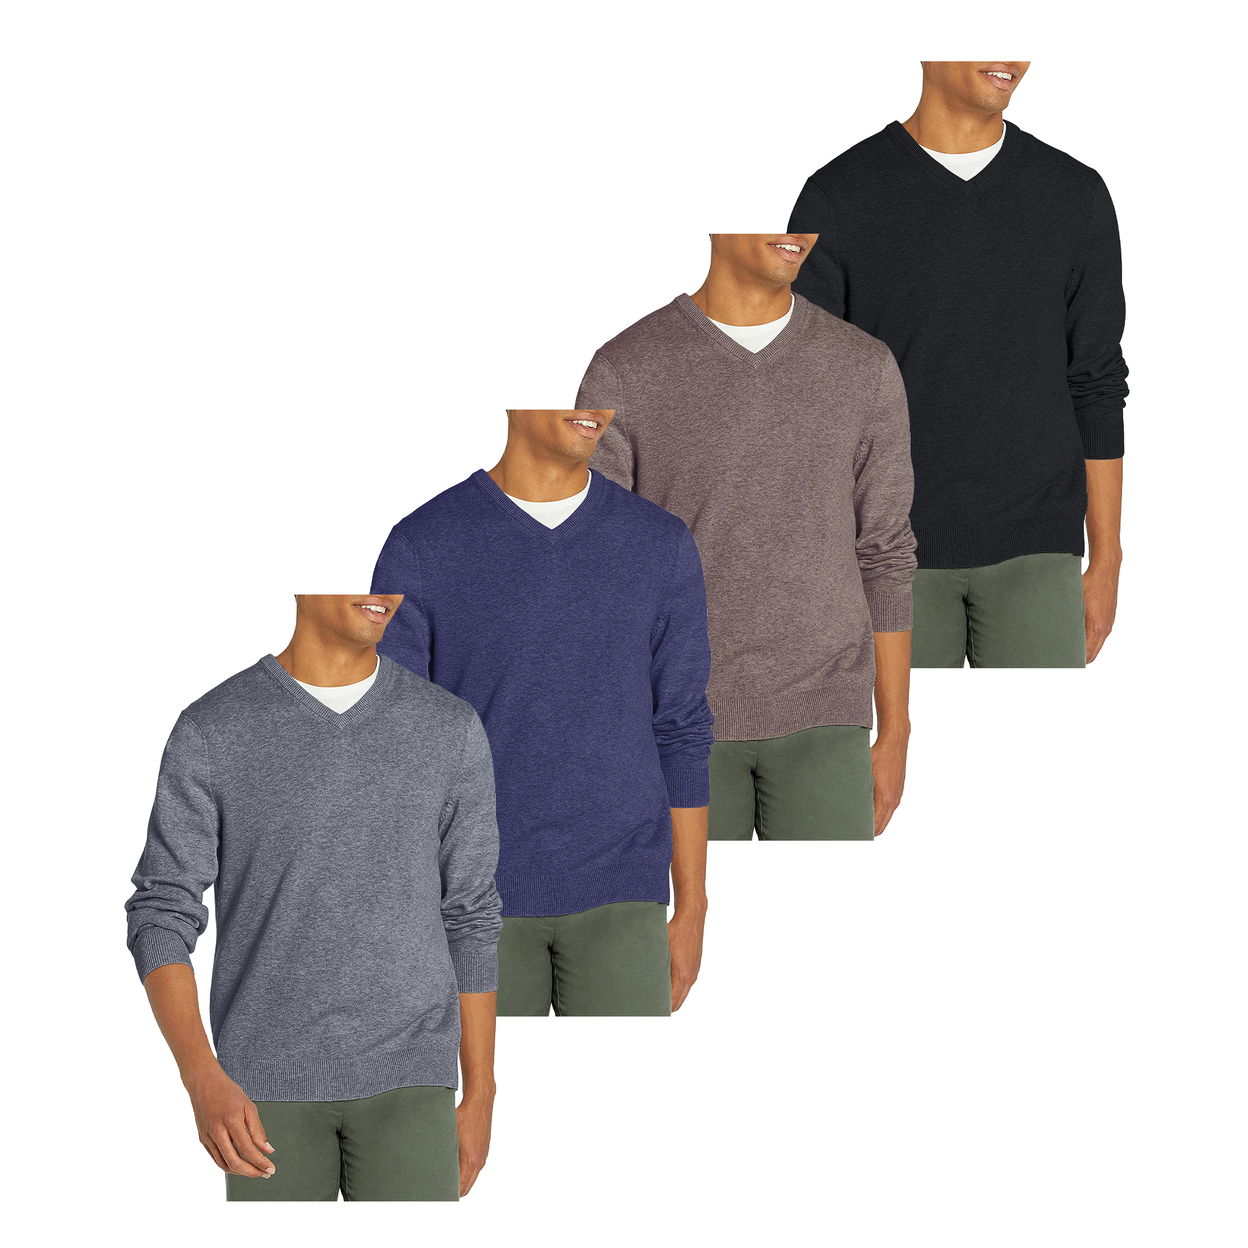 Multi-Pack: Men's Casual Ultra Soft Slim Fit Warm Knit V-Neck Sweater - 1-pack, X-large